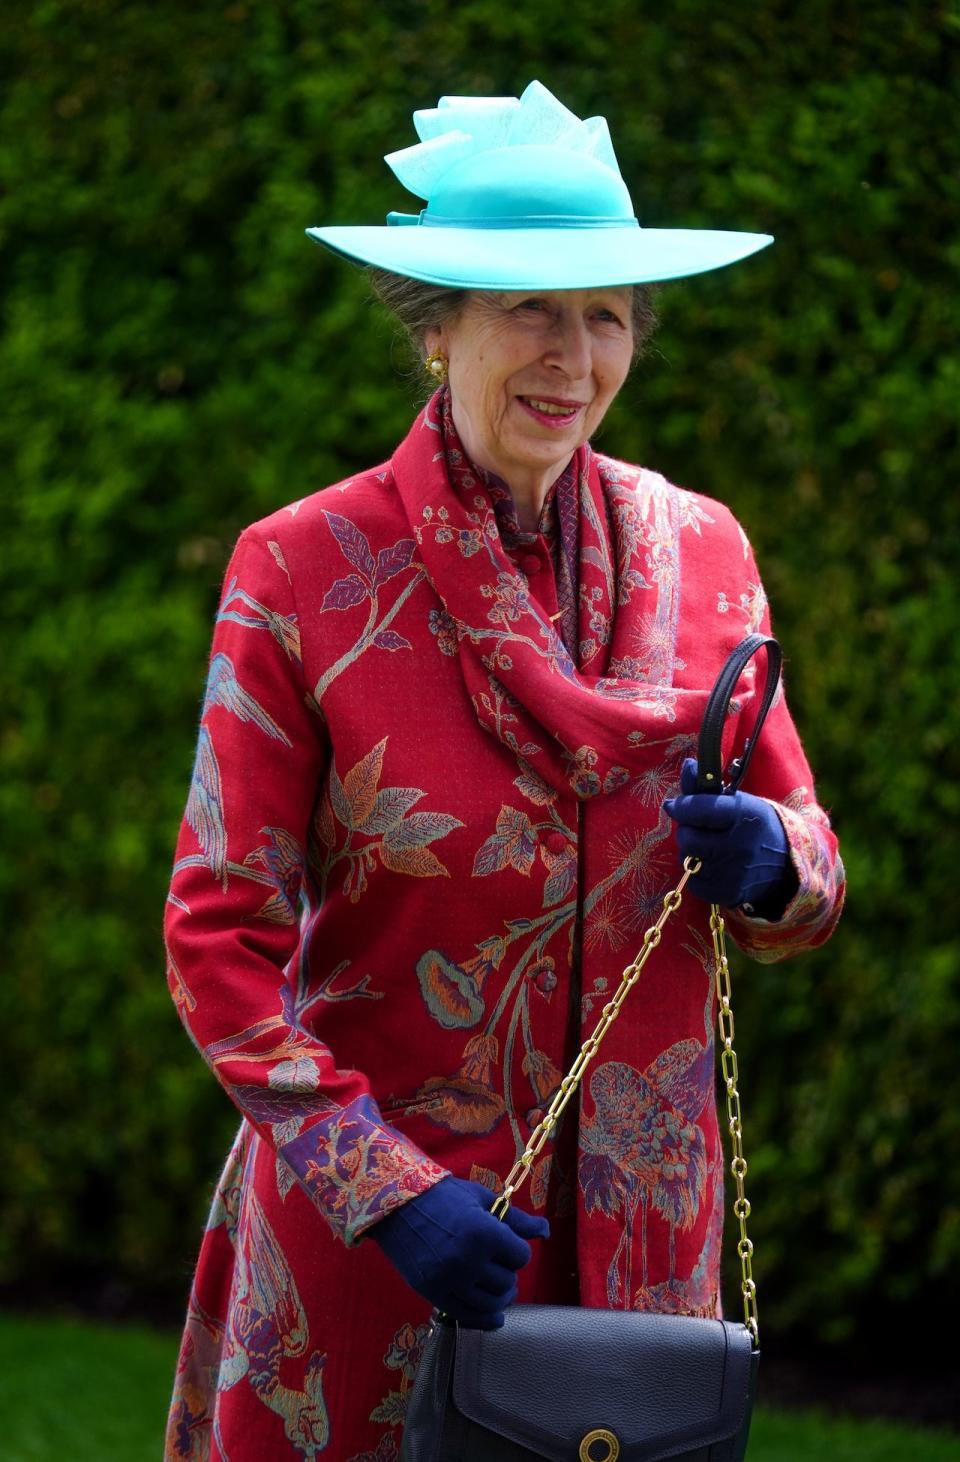 Princess Anne wearing an electric blue hat and a red coatdress.